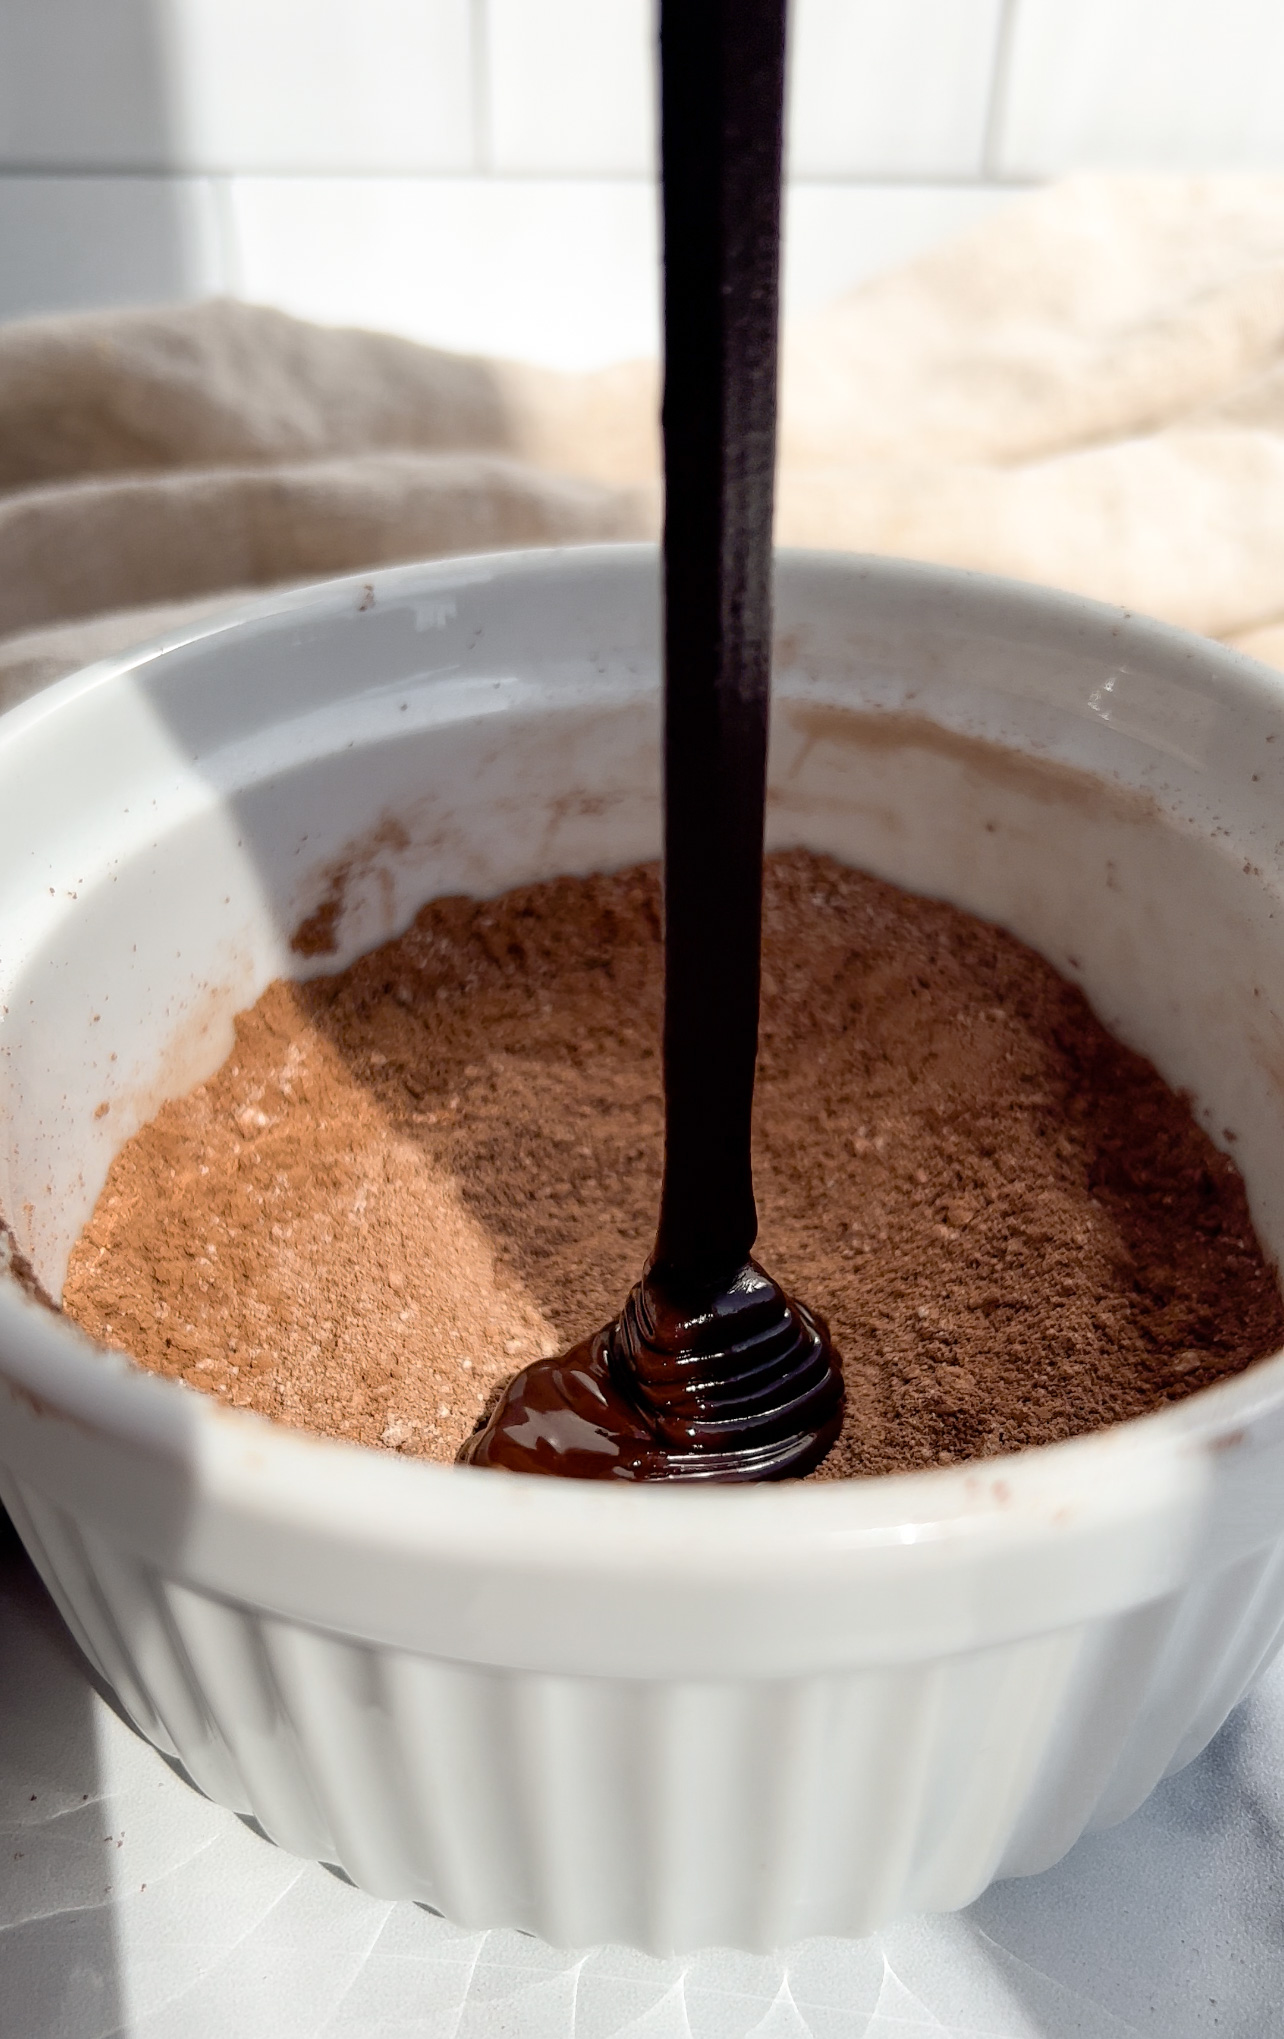 melted chocolate being added to a bowl